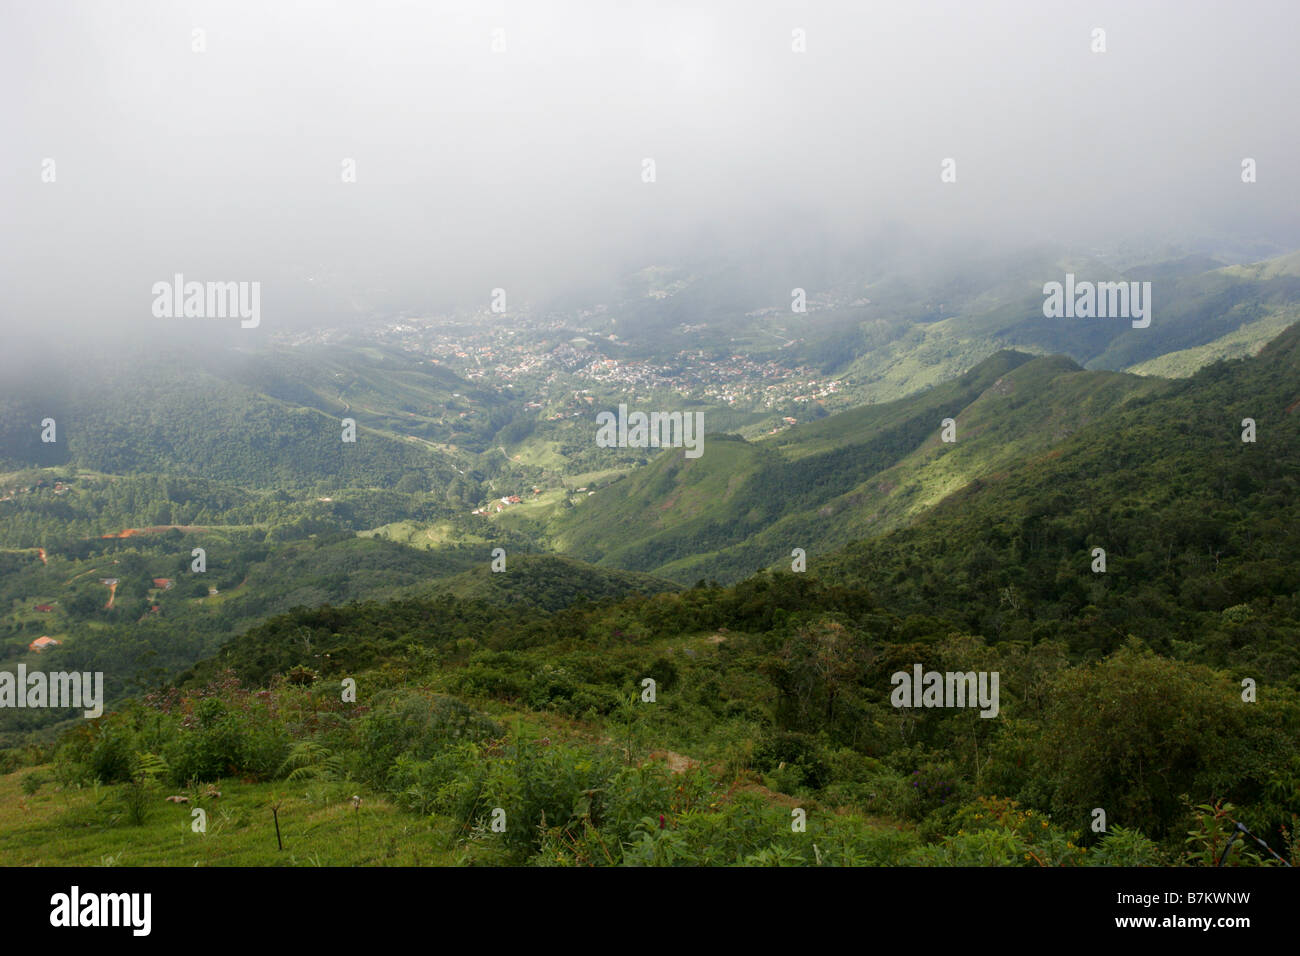 View of town of Novo Friburgo in valley covered in cloud Rio de Janeiro state Brazil Stock Photo